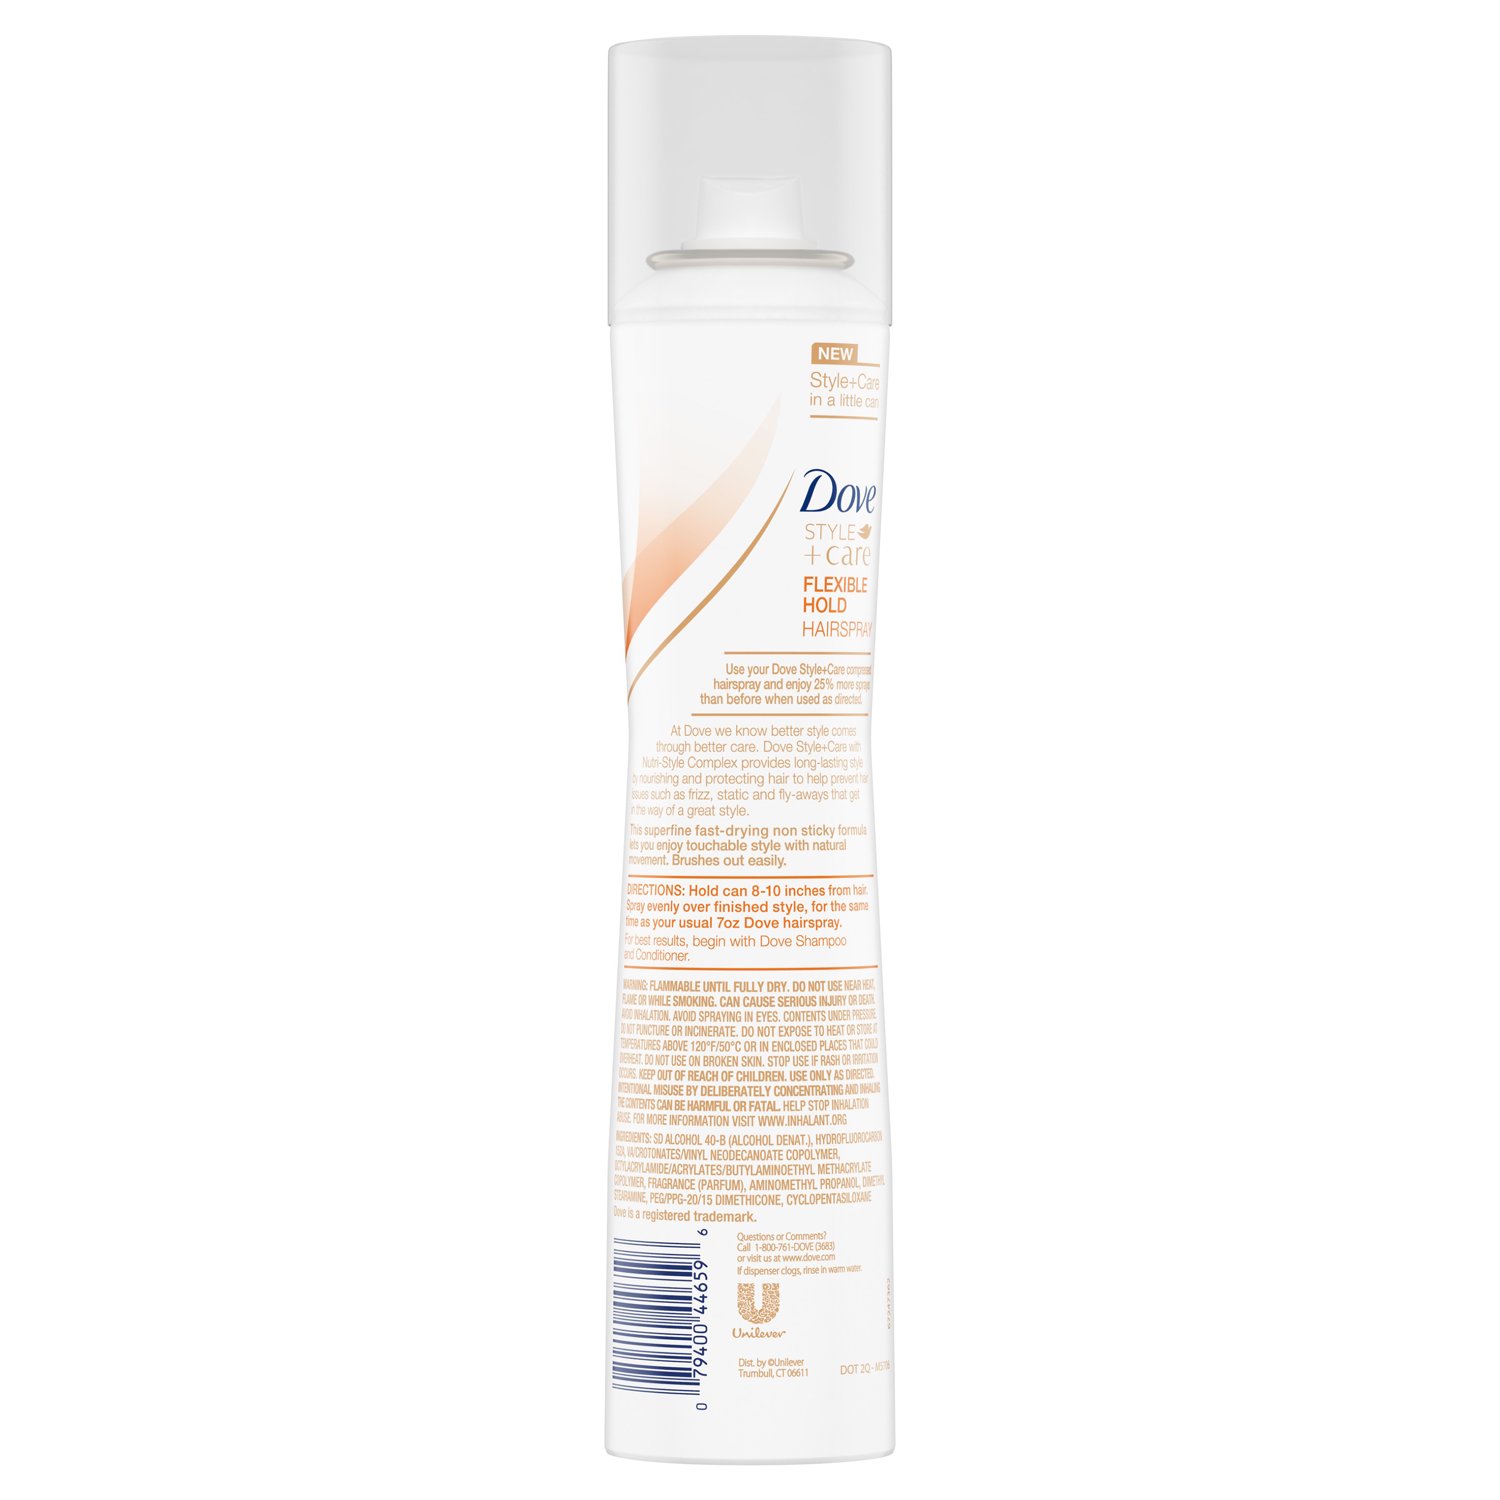 Dove Style+Care Compressed Micro Mist hairspray, 5.5 oz - image 5 of 8